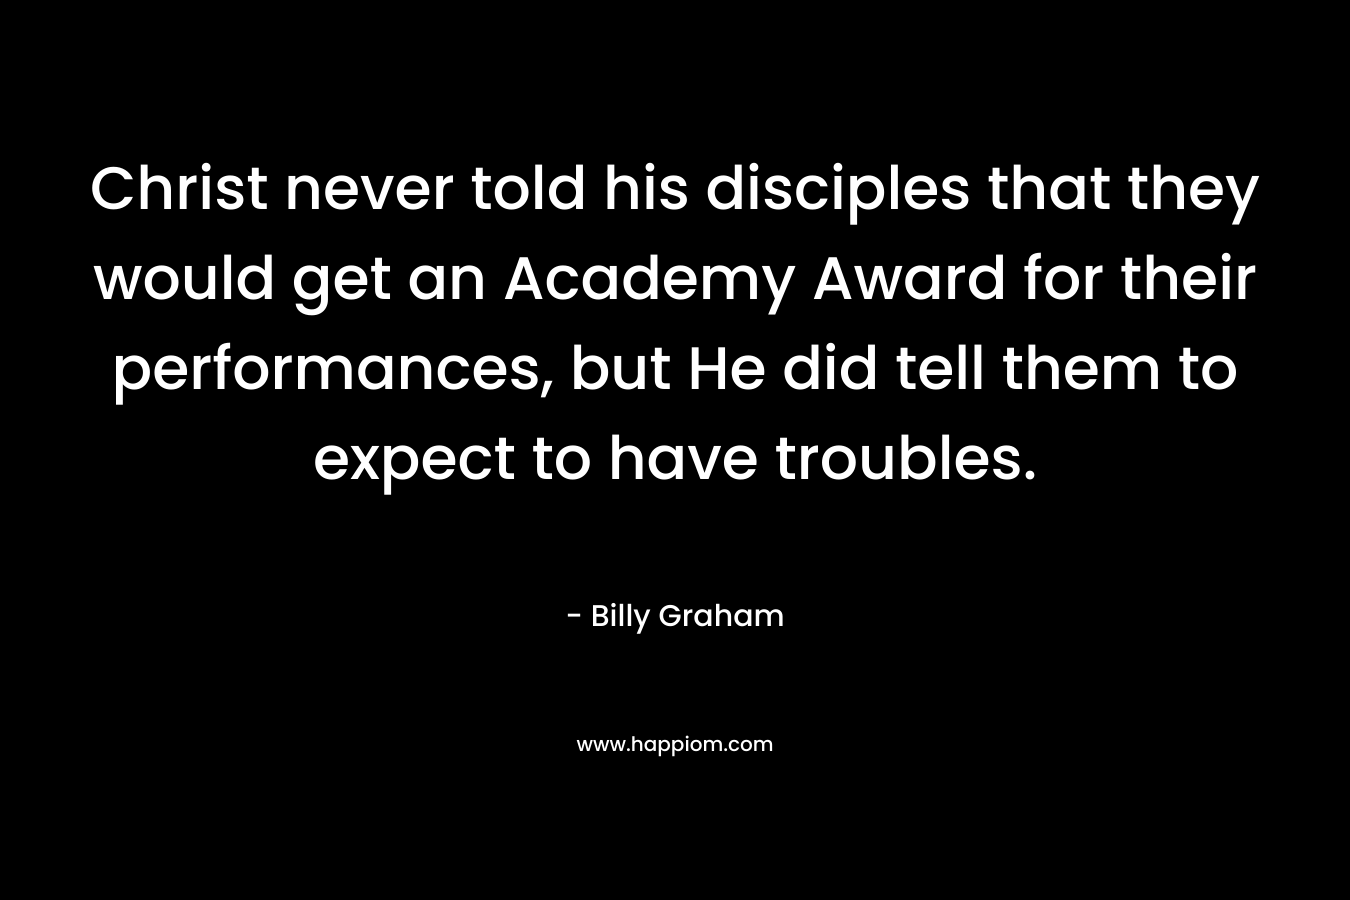 Christ never told his disciples that they would get an Academy Award for their performances, but He did tell them to expect to have troubles. – Billy Graham